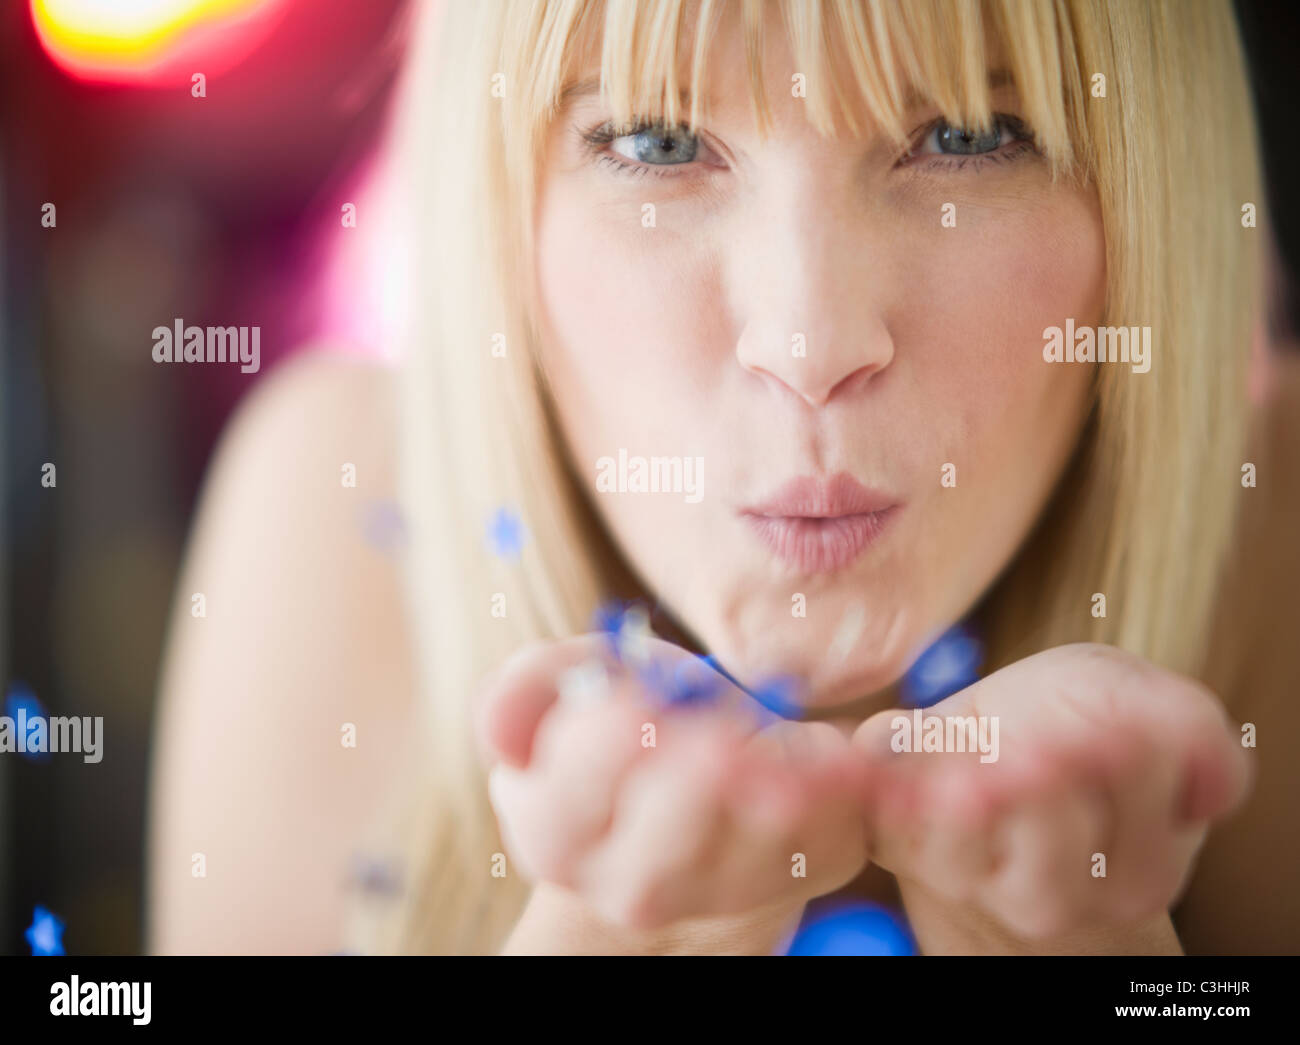 Young woman blowing confetti Stock Photo